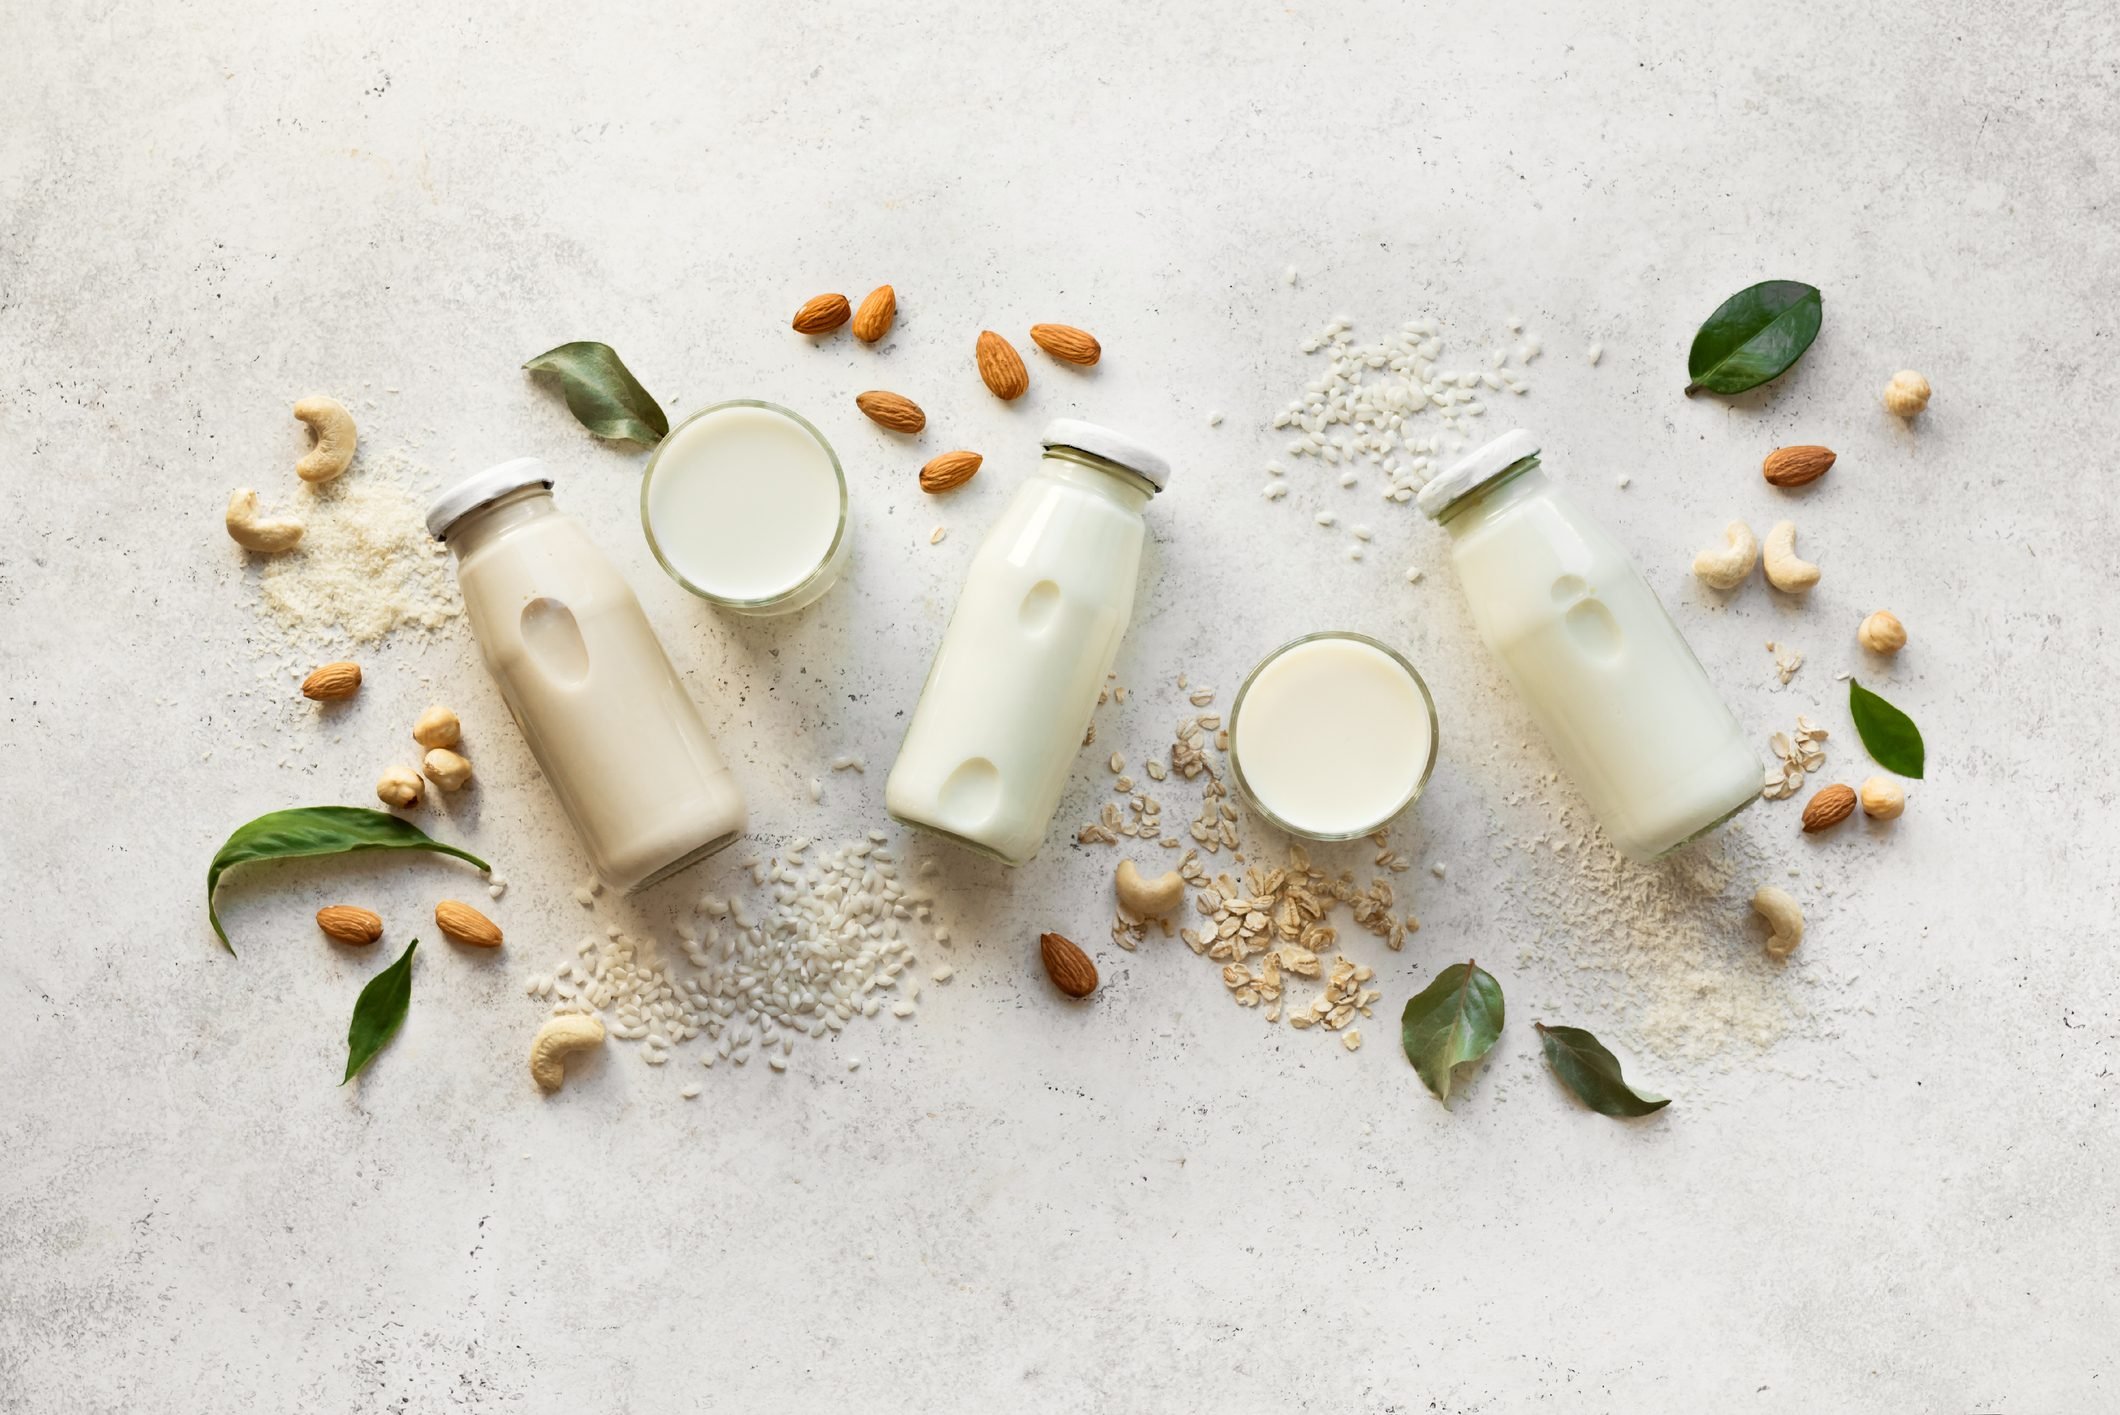 Cashew Milk vs. Almond Milk: What's the Difference?